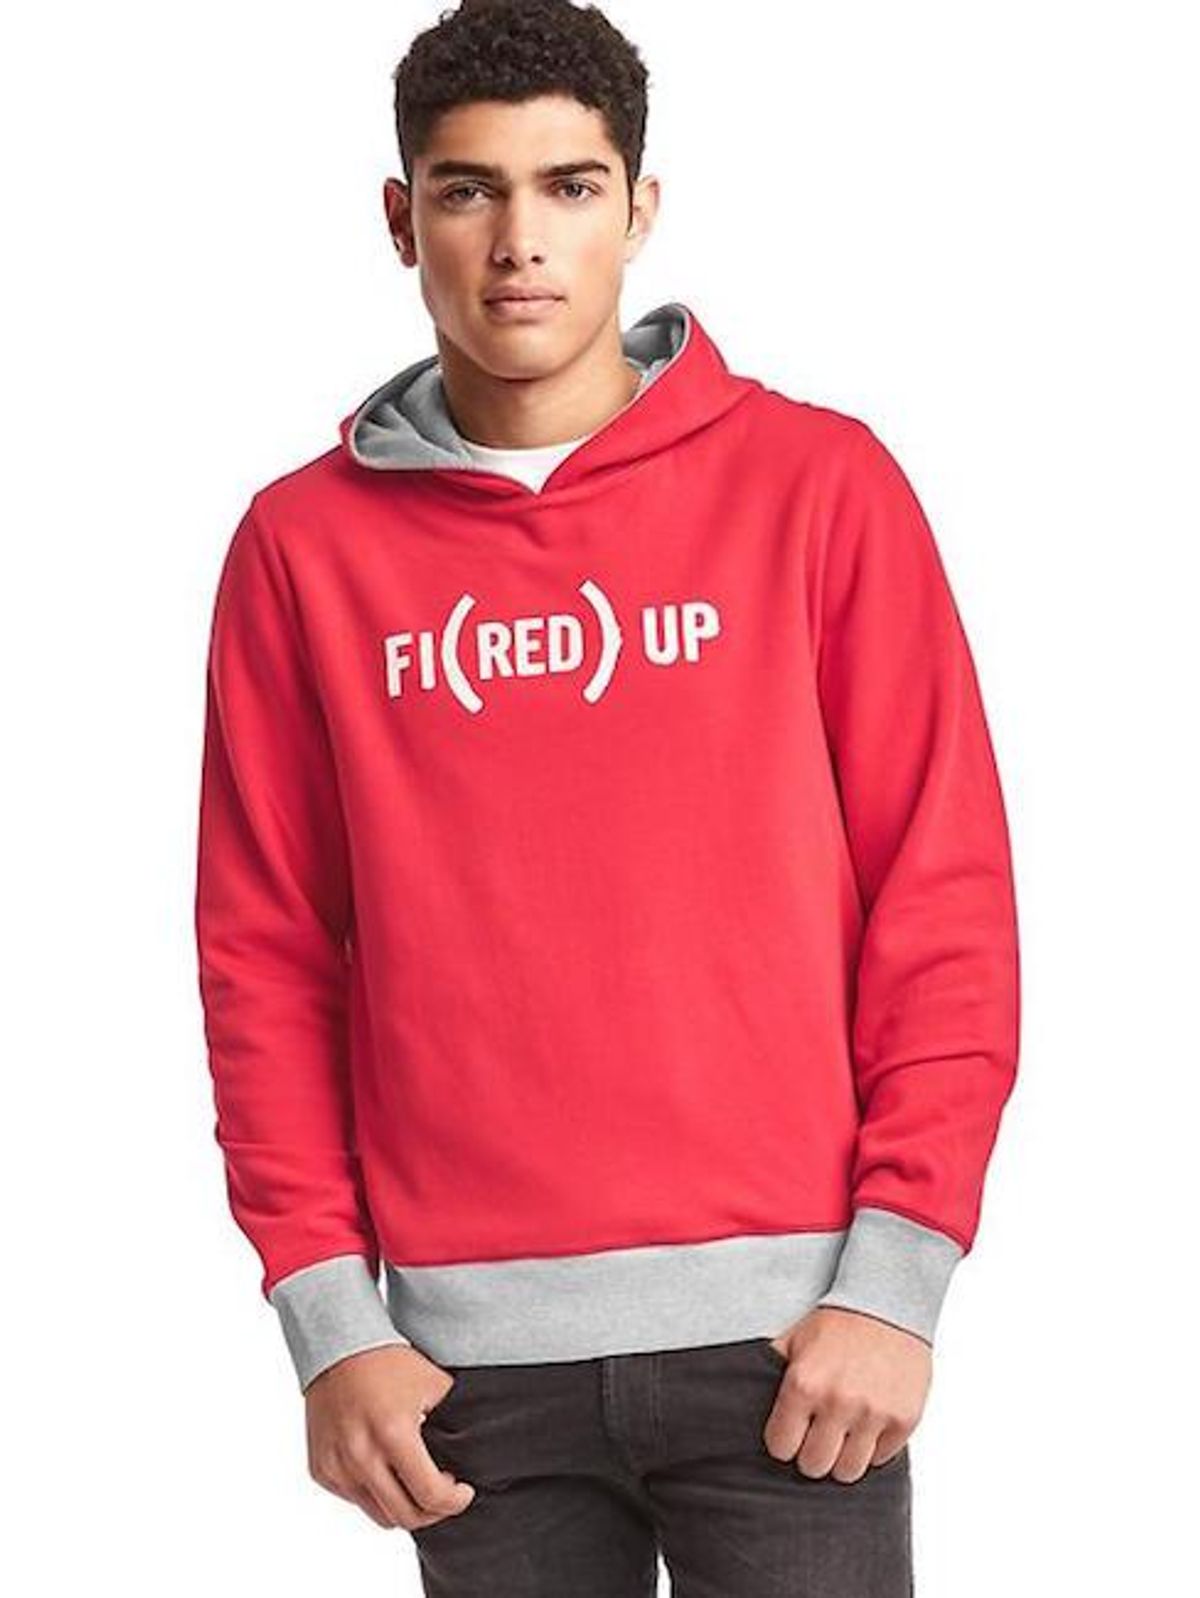 Gap red collection 2016